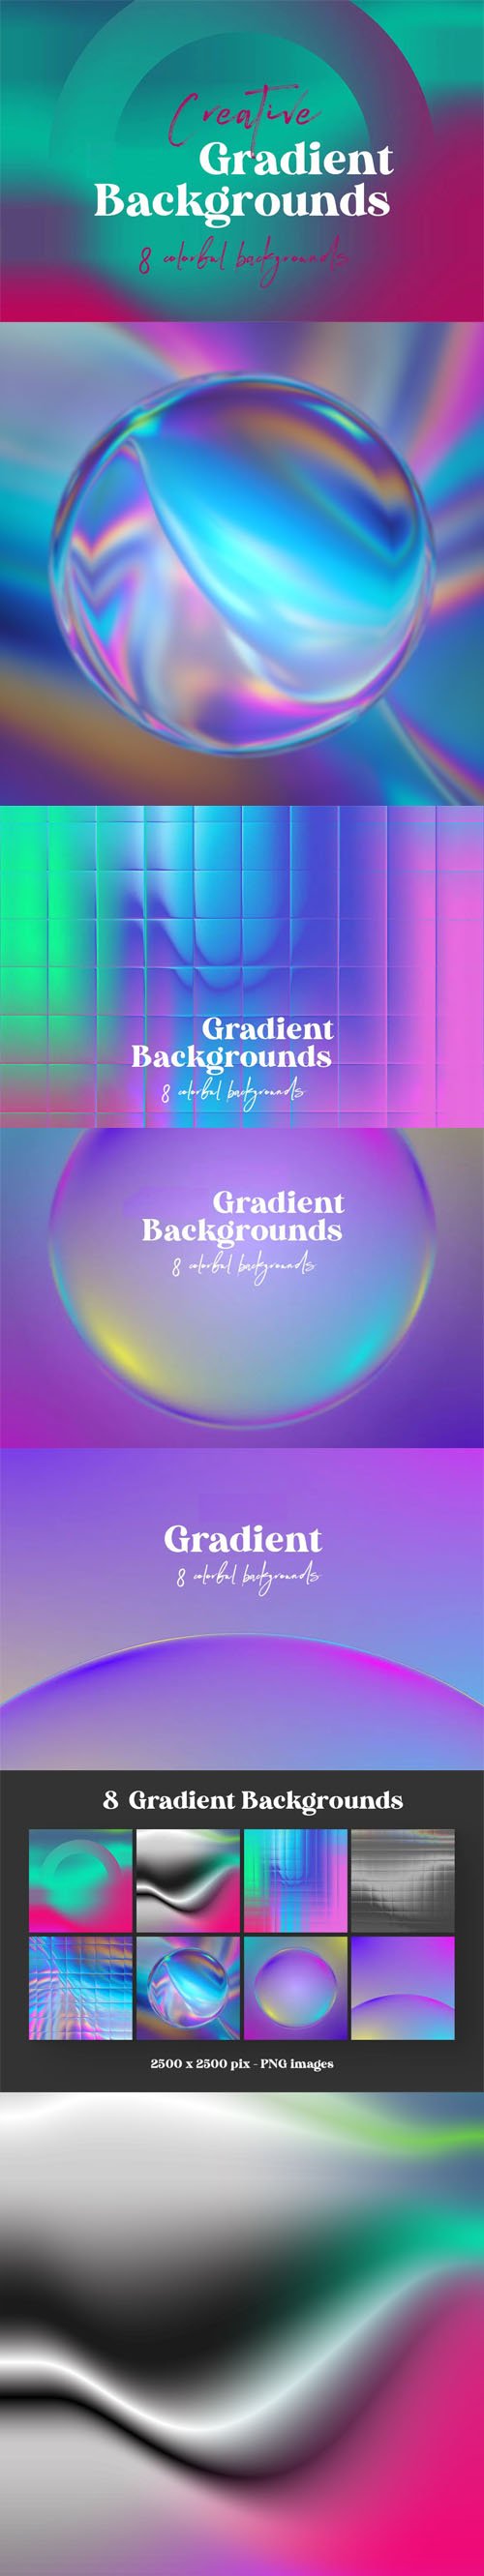 8 Creative Colorful Gradient Backgrounds